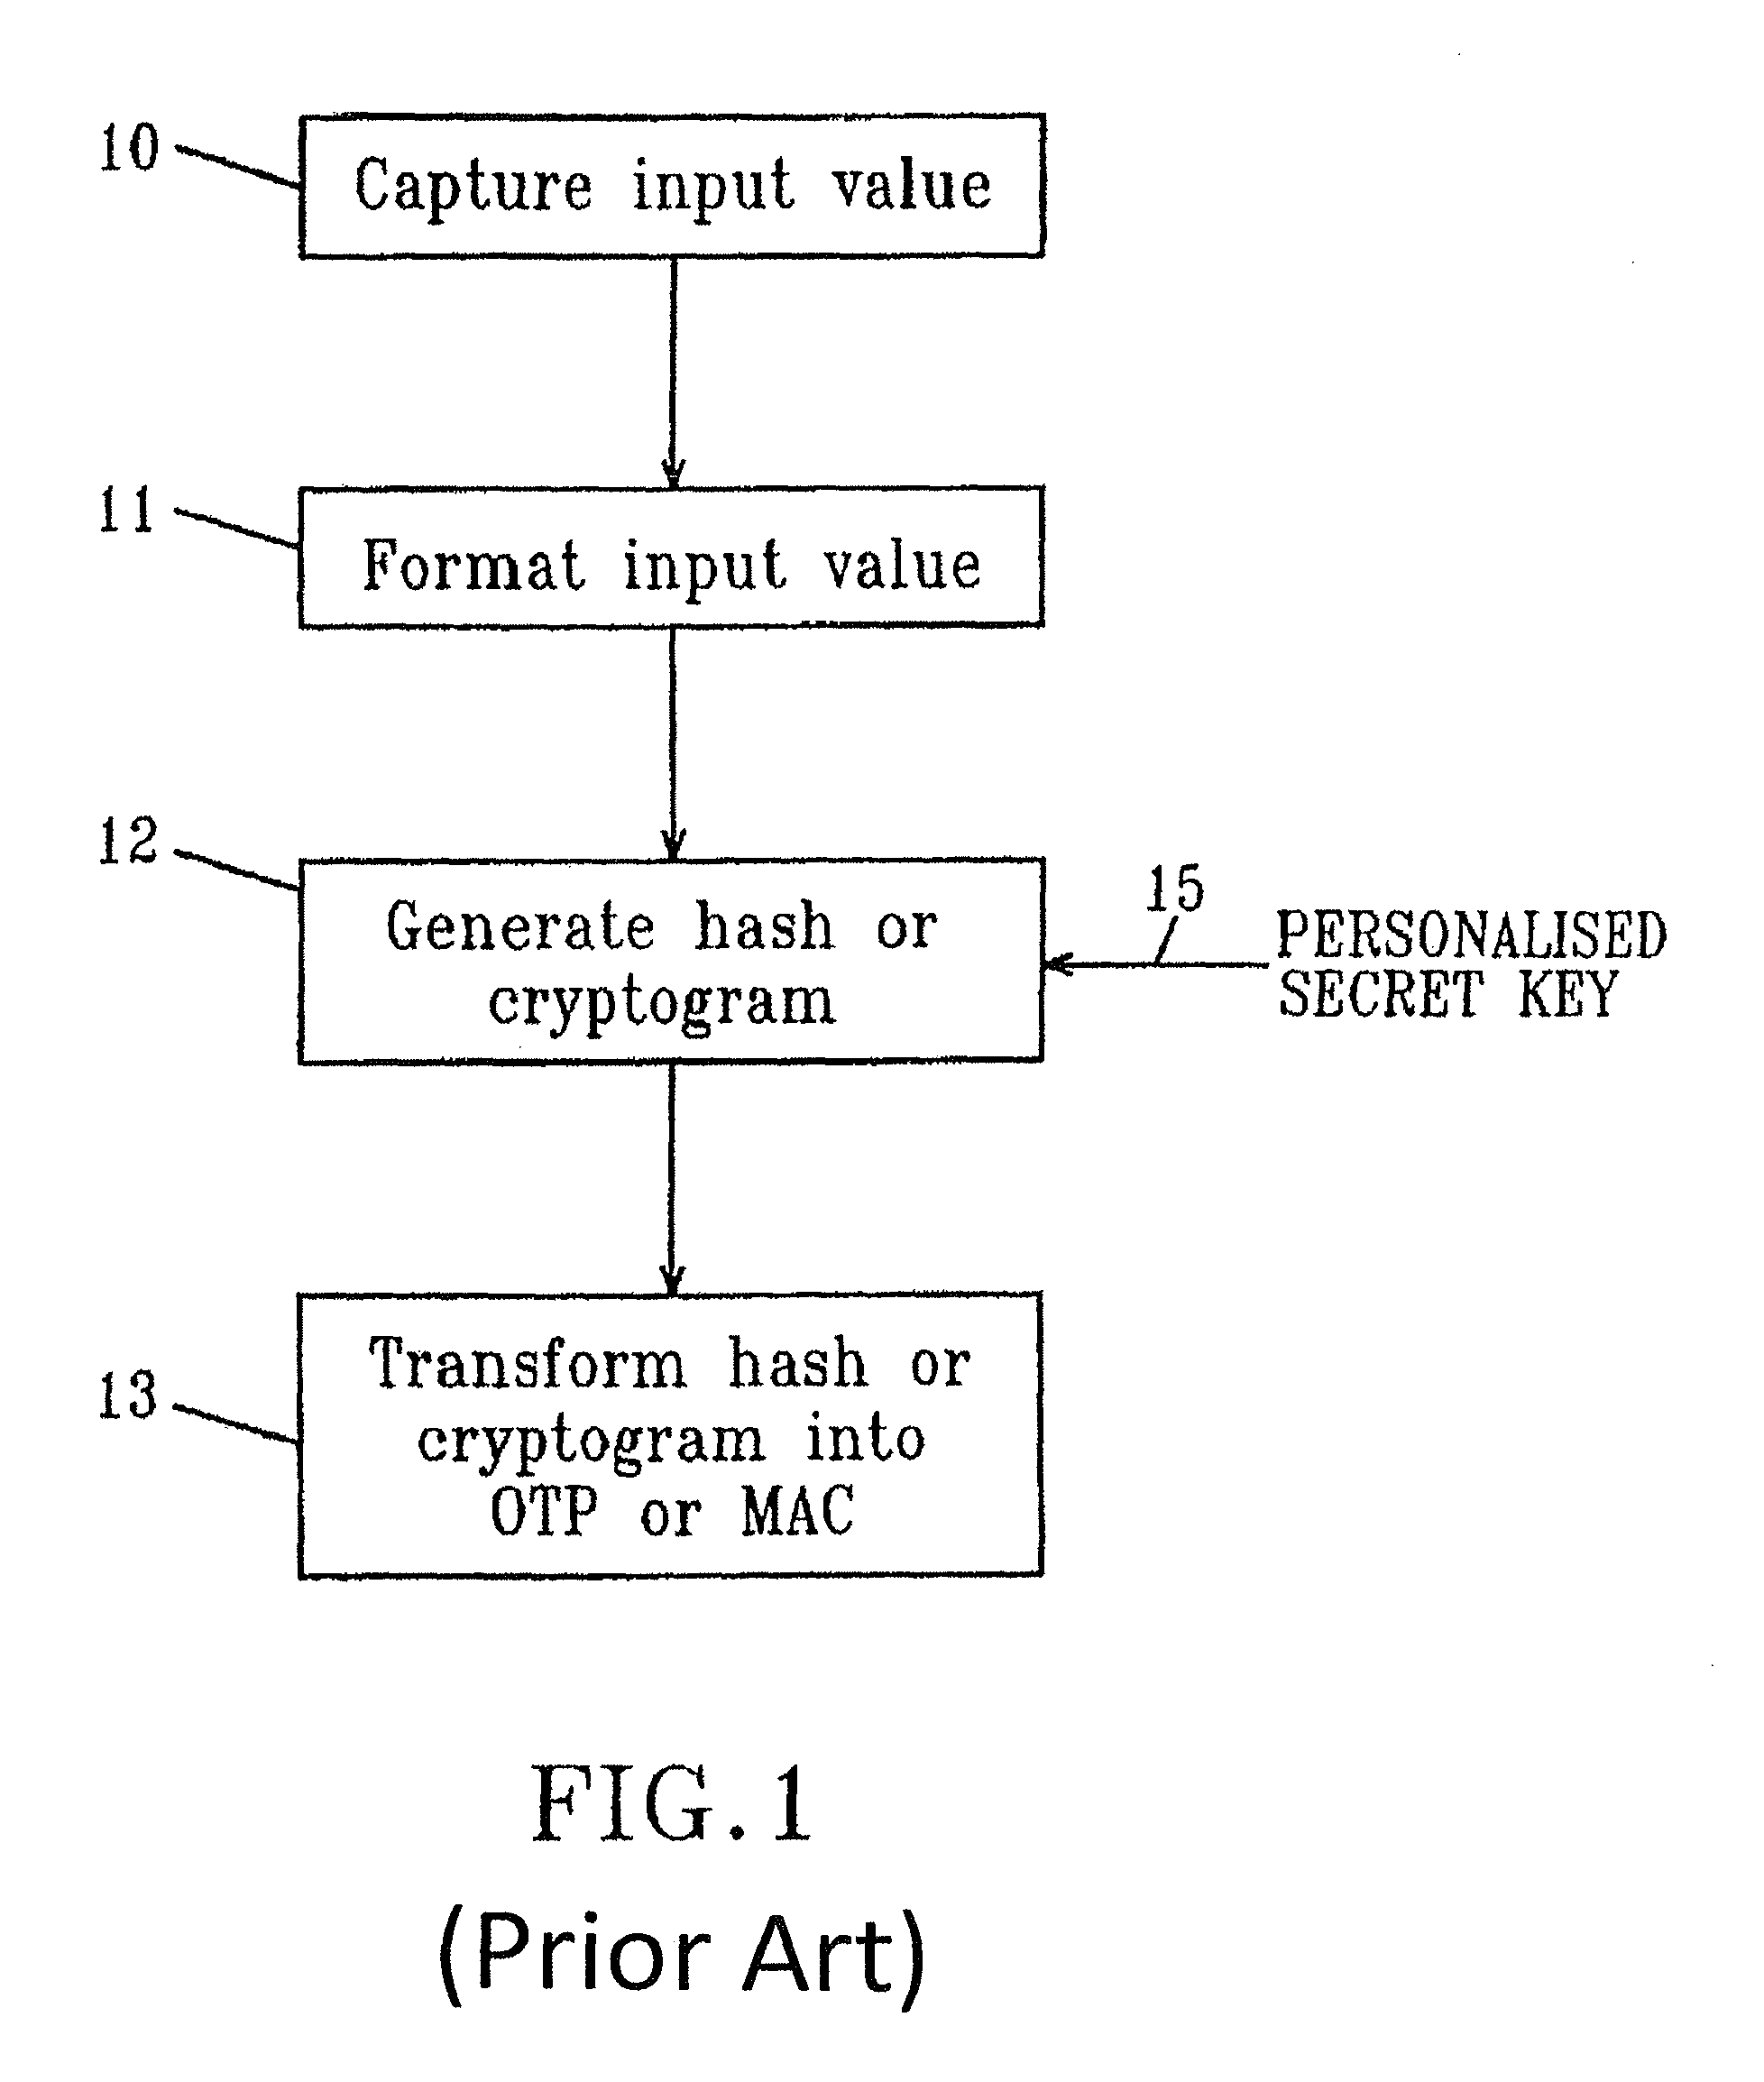 Remote authentication and transaction signatures